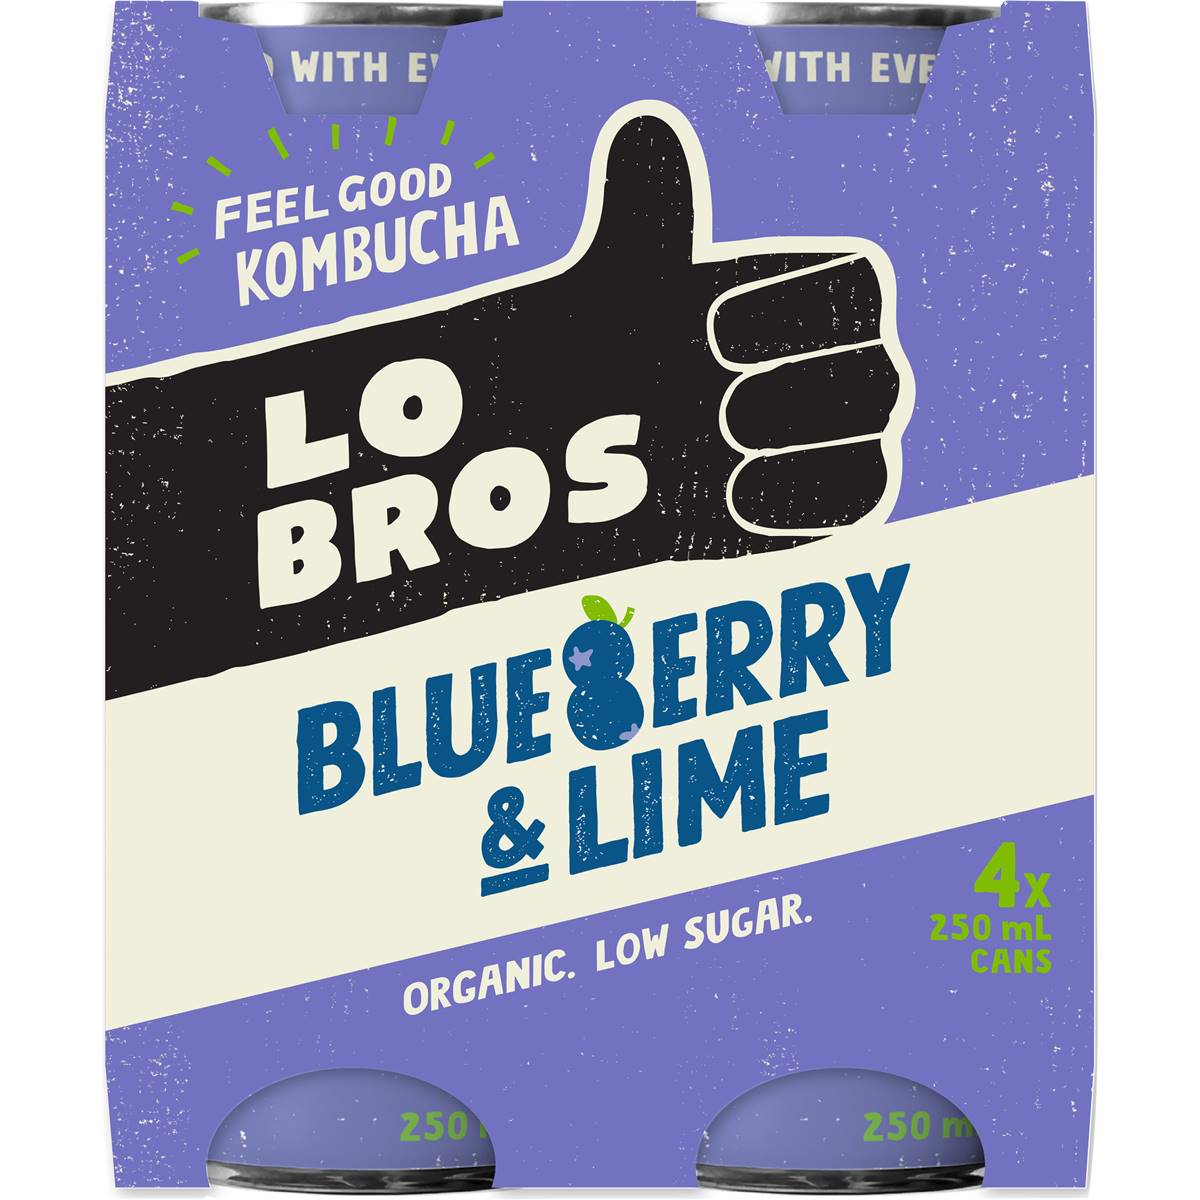 Calories in Lo Bros Kombucha Blueberry & Lime